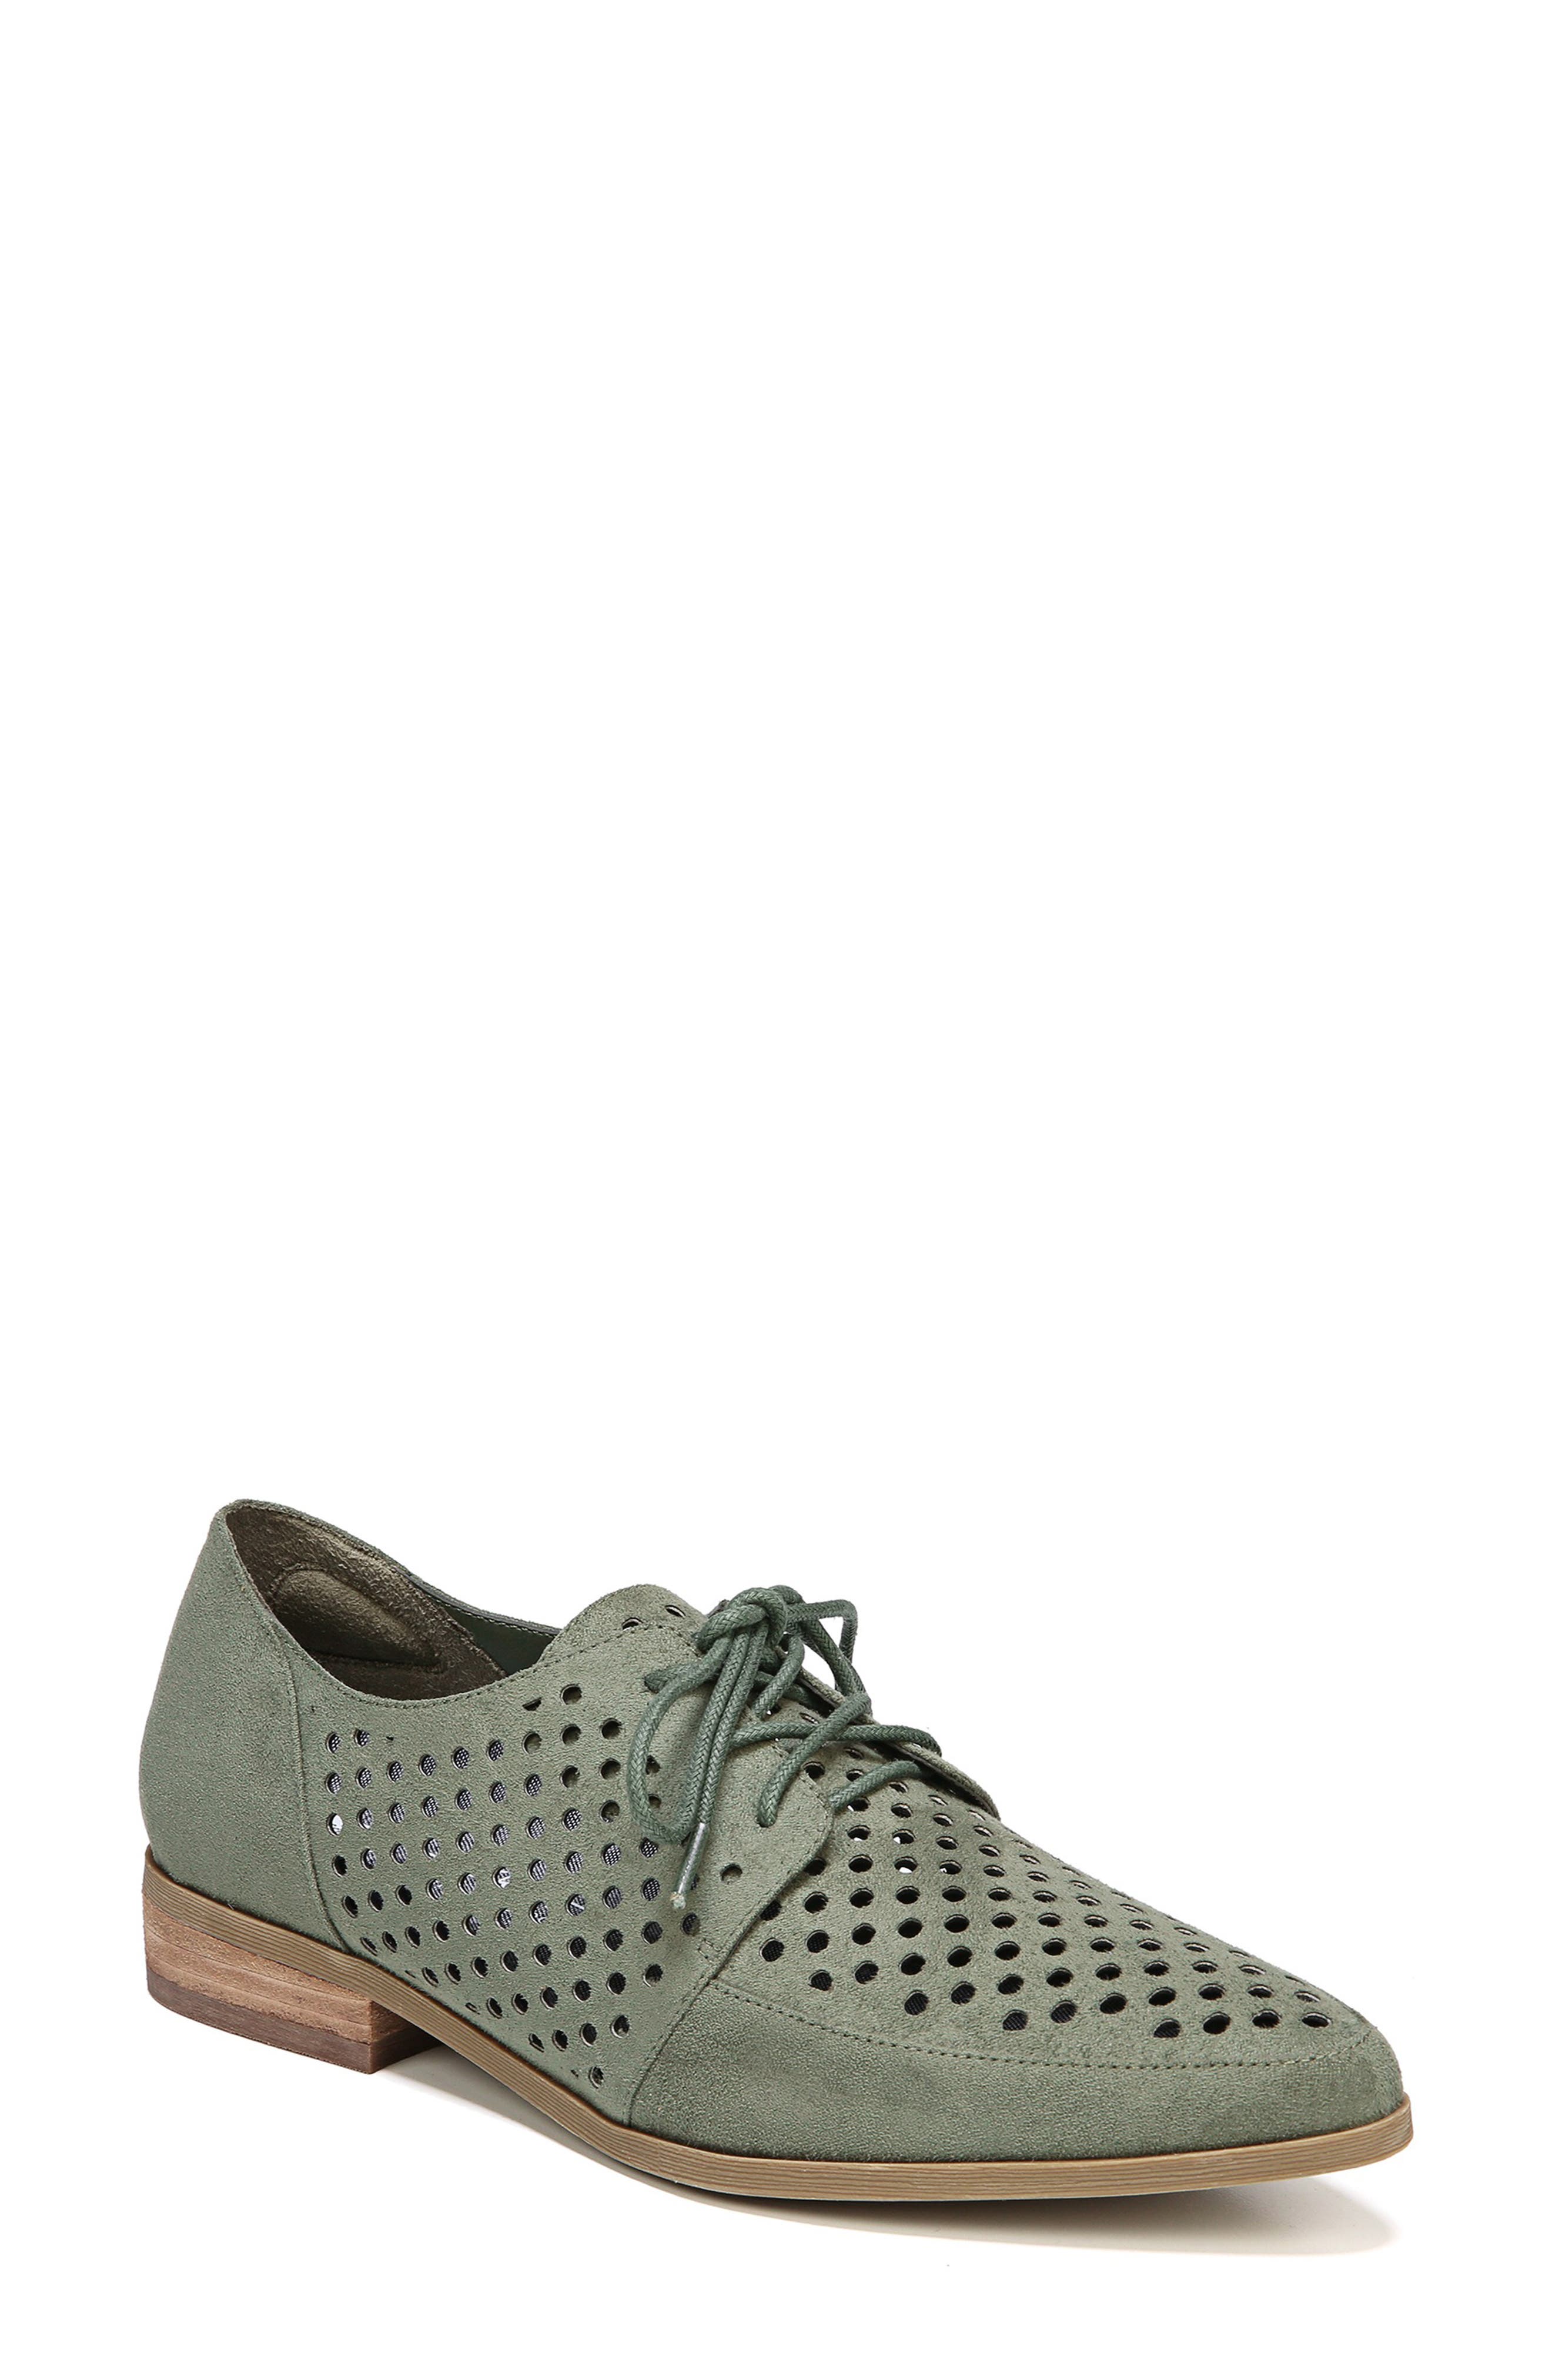 UPC 017115689624 product image for Women's Dr. Scholl's Equal Chop Derby, Size 7.5 M - Green | upcitemdb.com